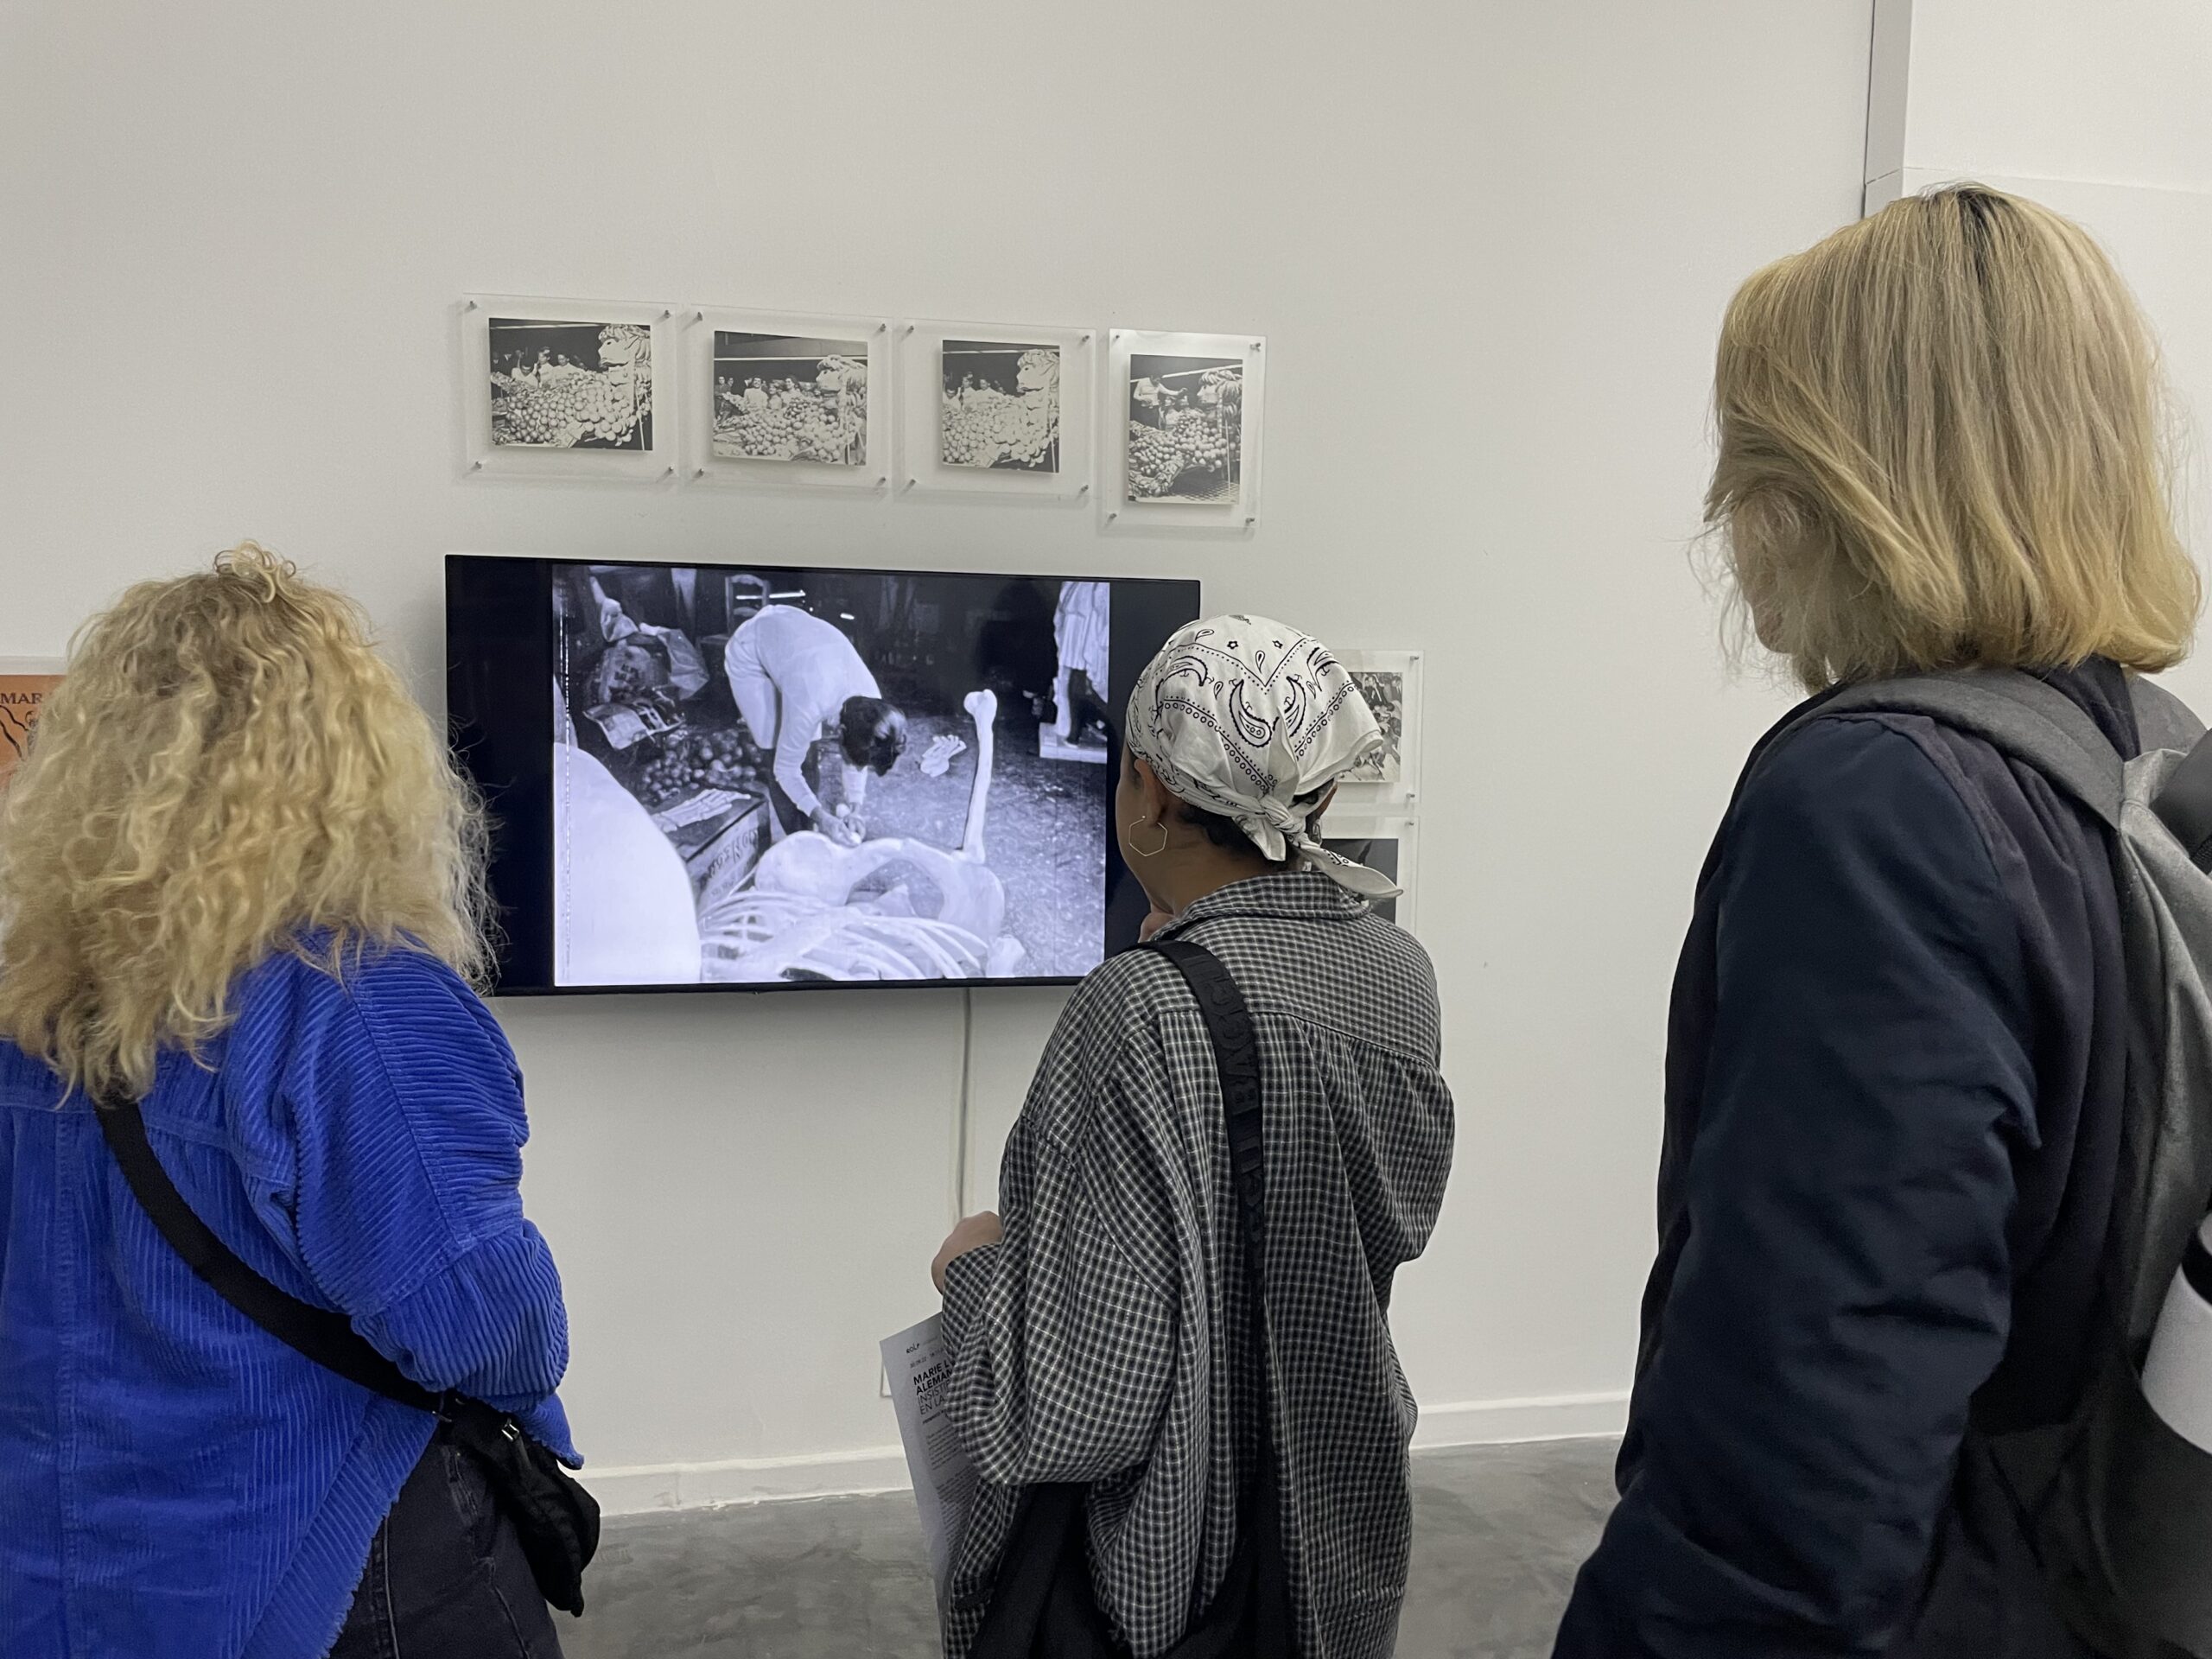 Several students observe an art show curated by an NYU professor.